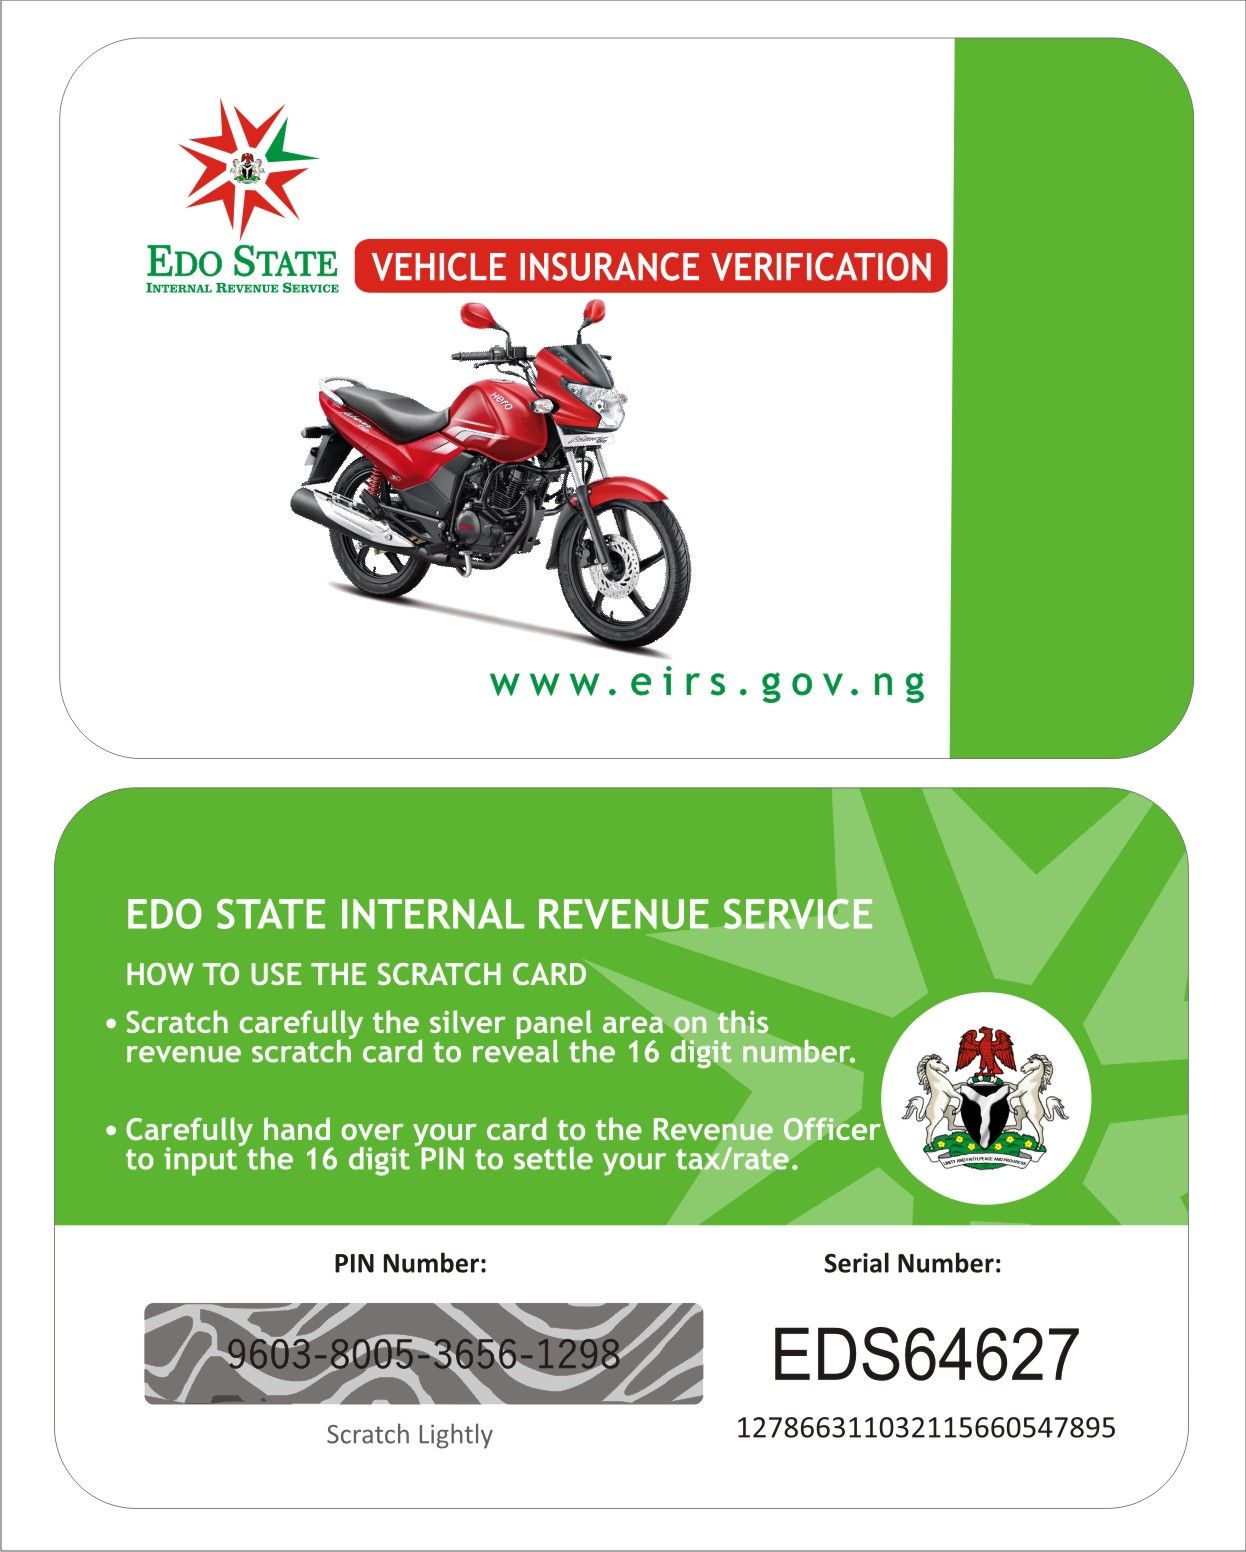 CALL EMMANUEL ON 08176499649,09021612751 TO PRINT ALL TYPE OF SCRATCH CARDS IN LAGOS NIGERIA